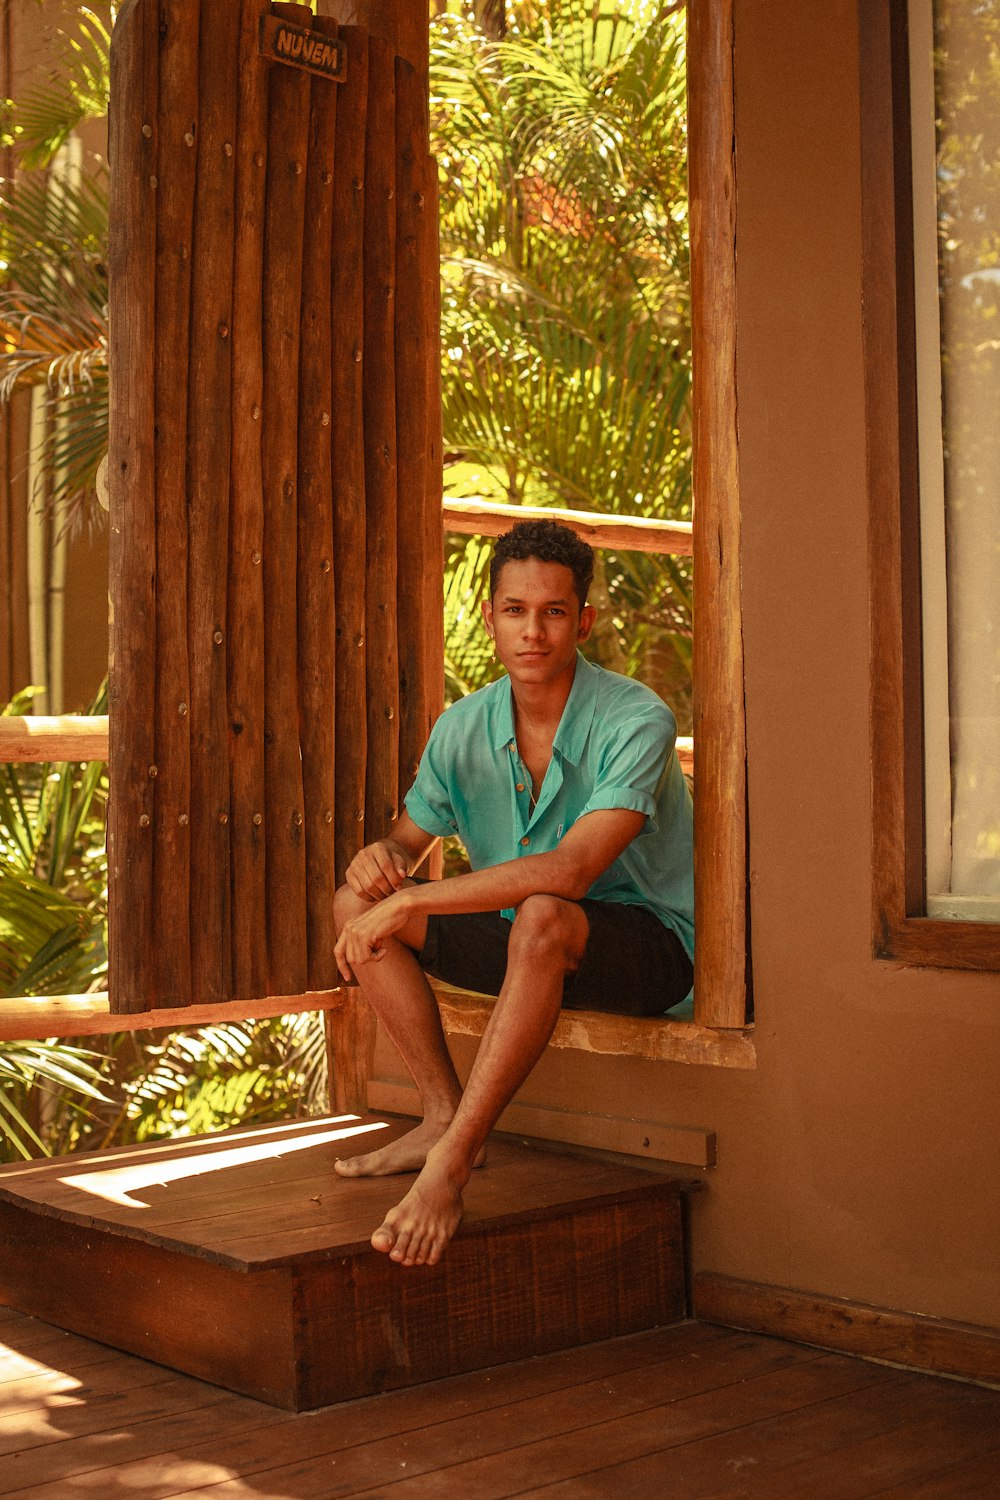 man in teal button up shirt sitting on brown wooden bench